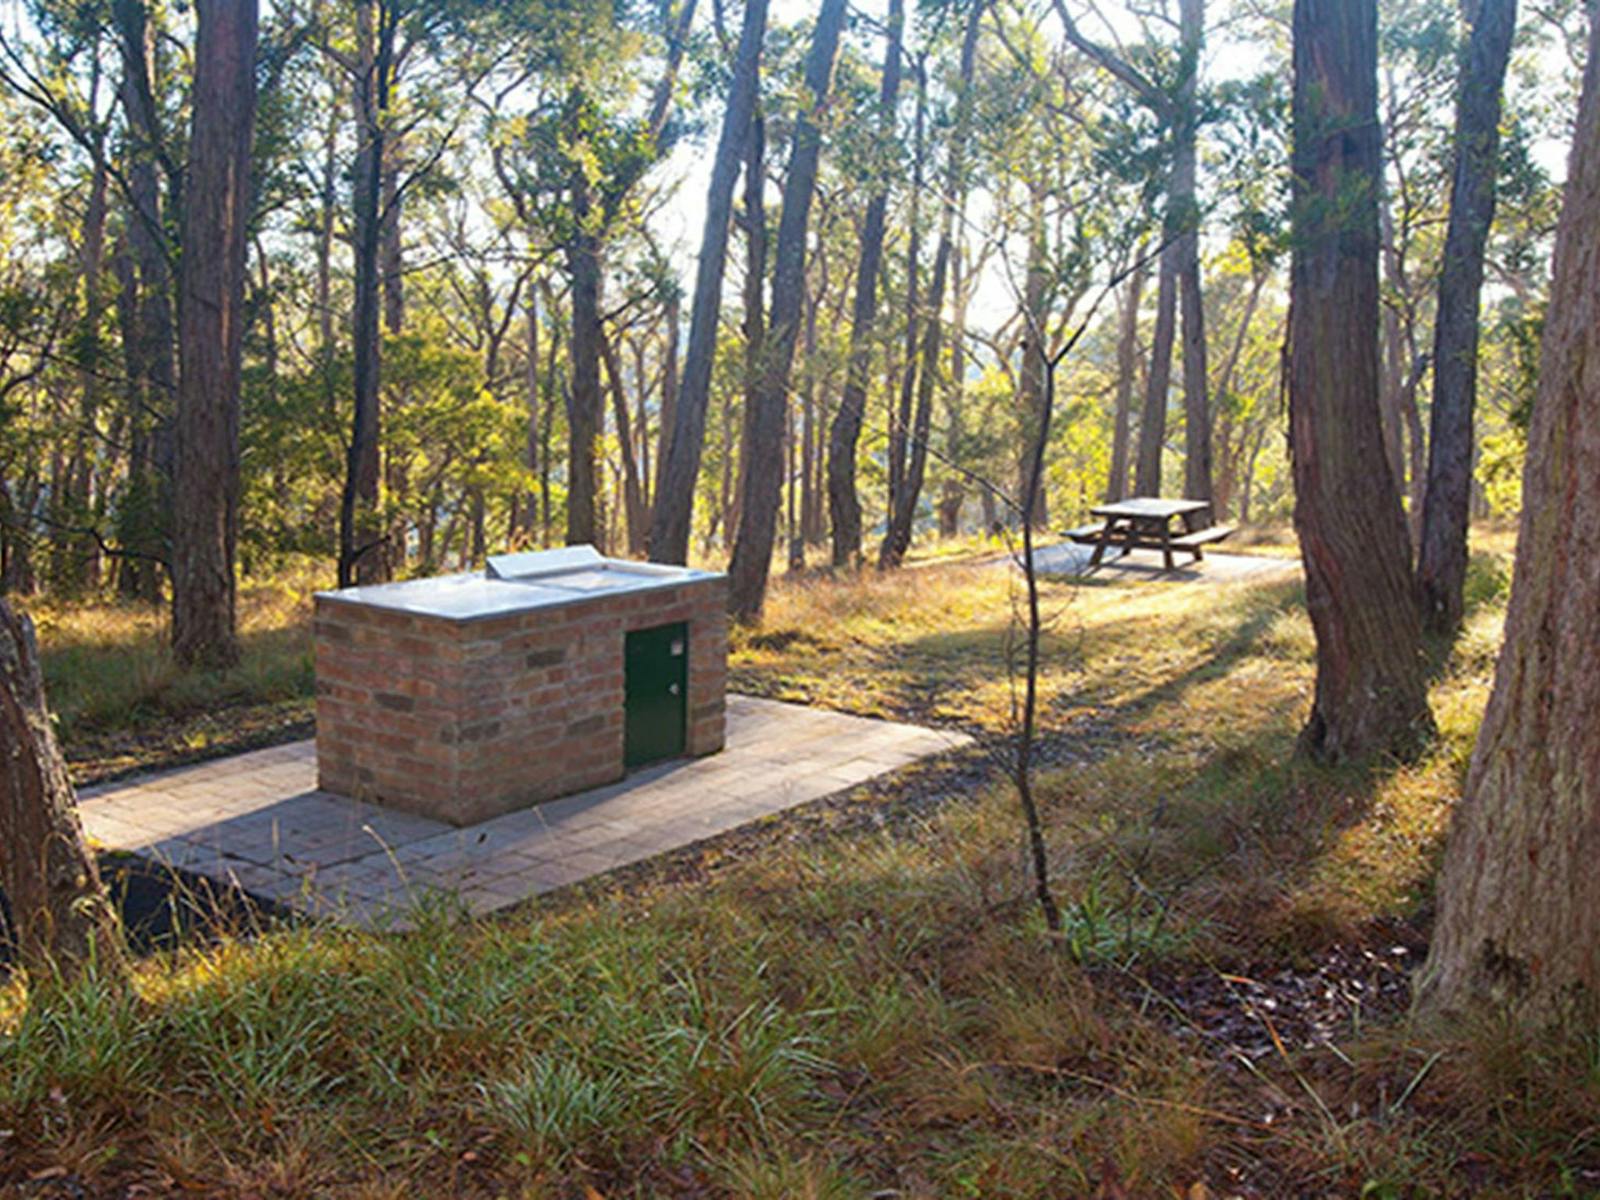 Barbecue facilities and picnic table at Tia Falls campground, Oxley Wild Rivers National Park.